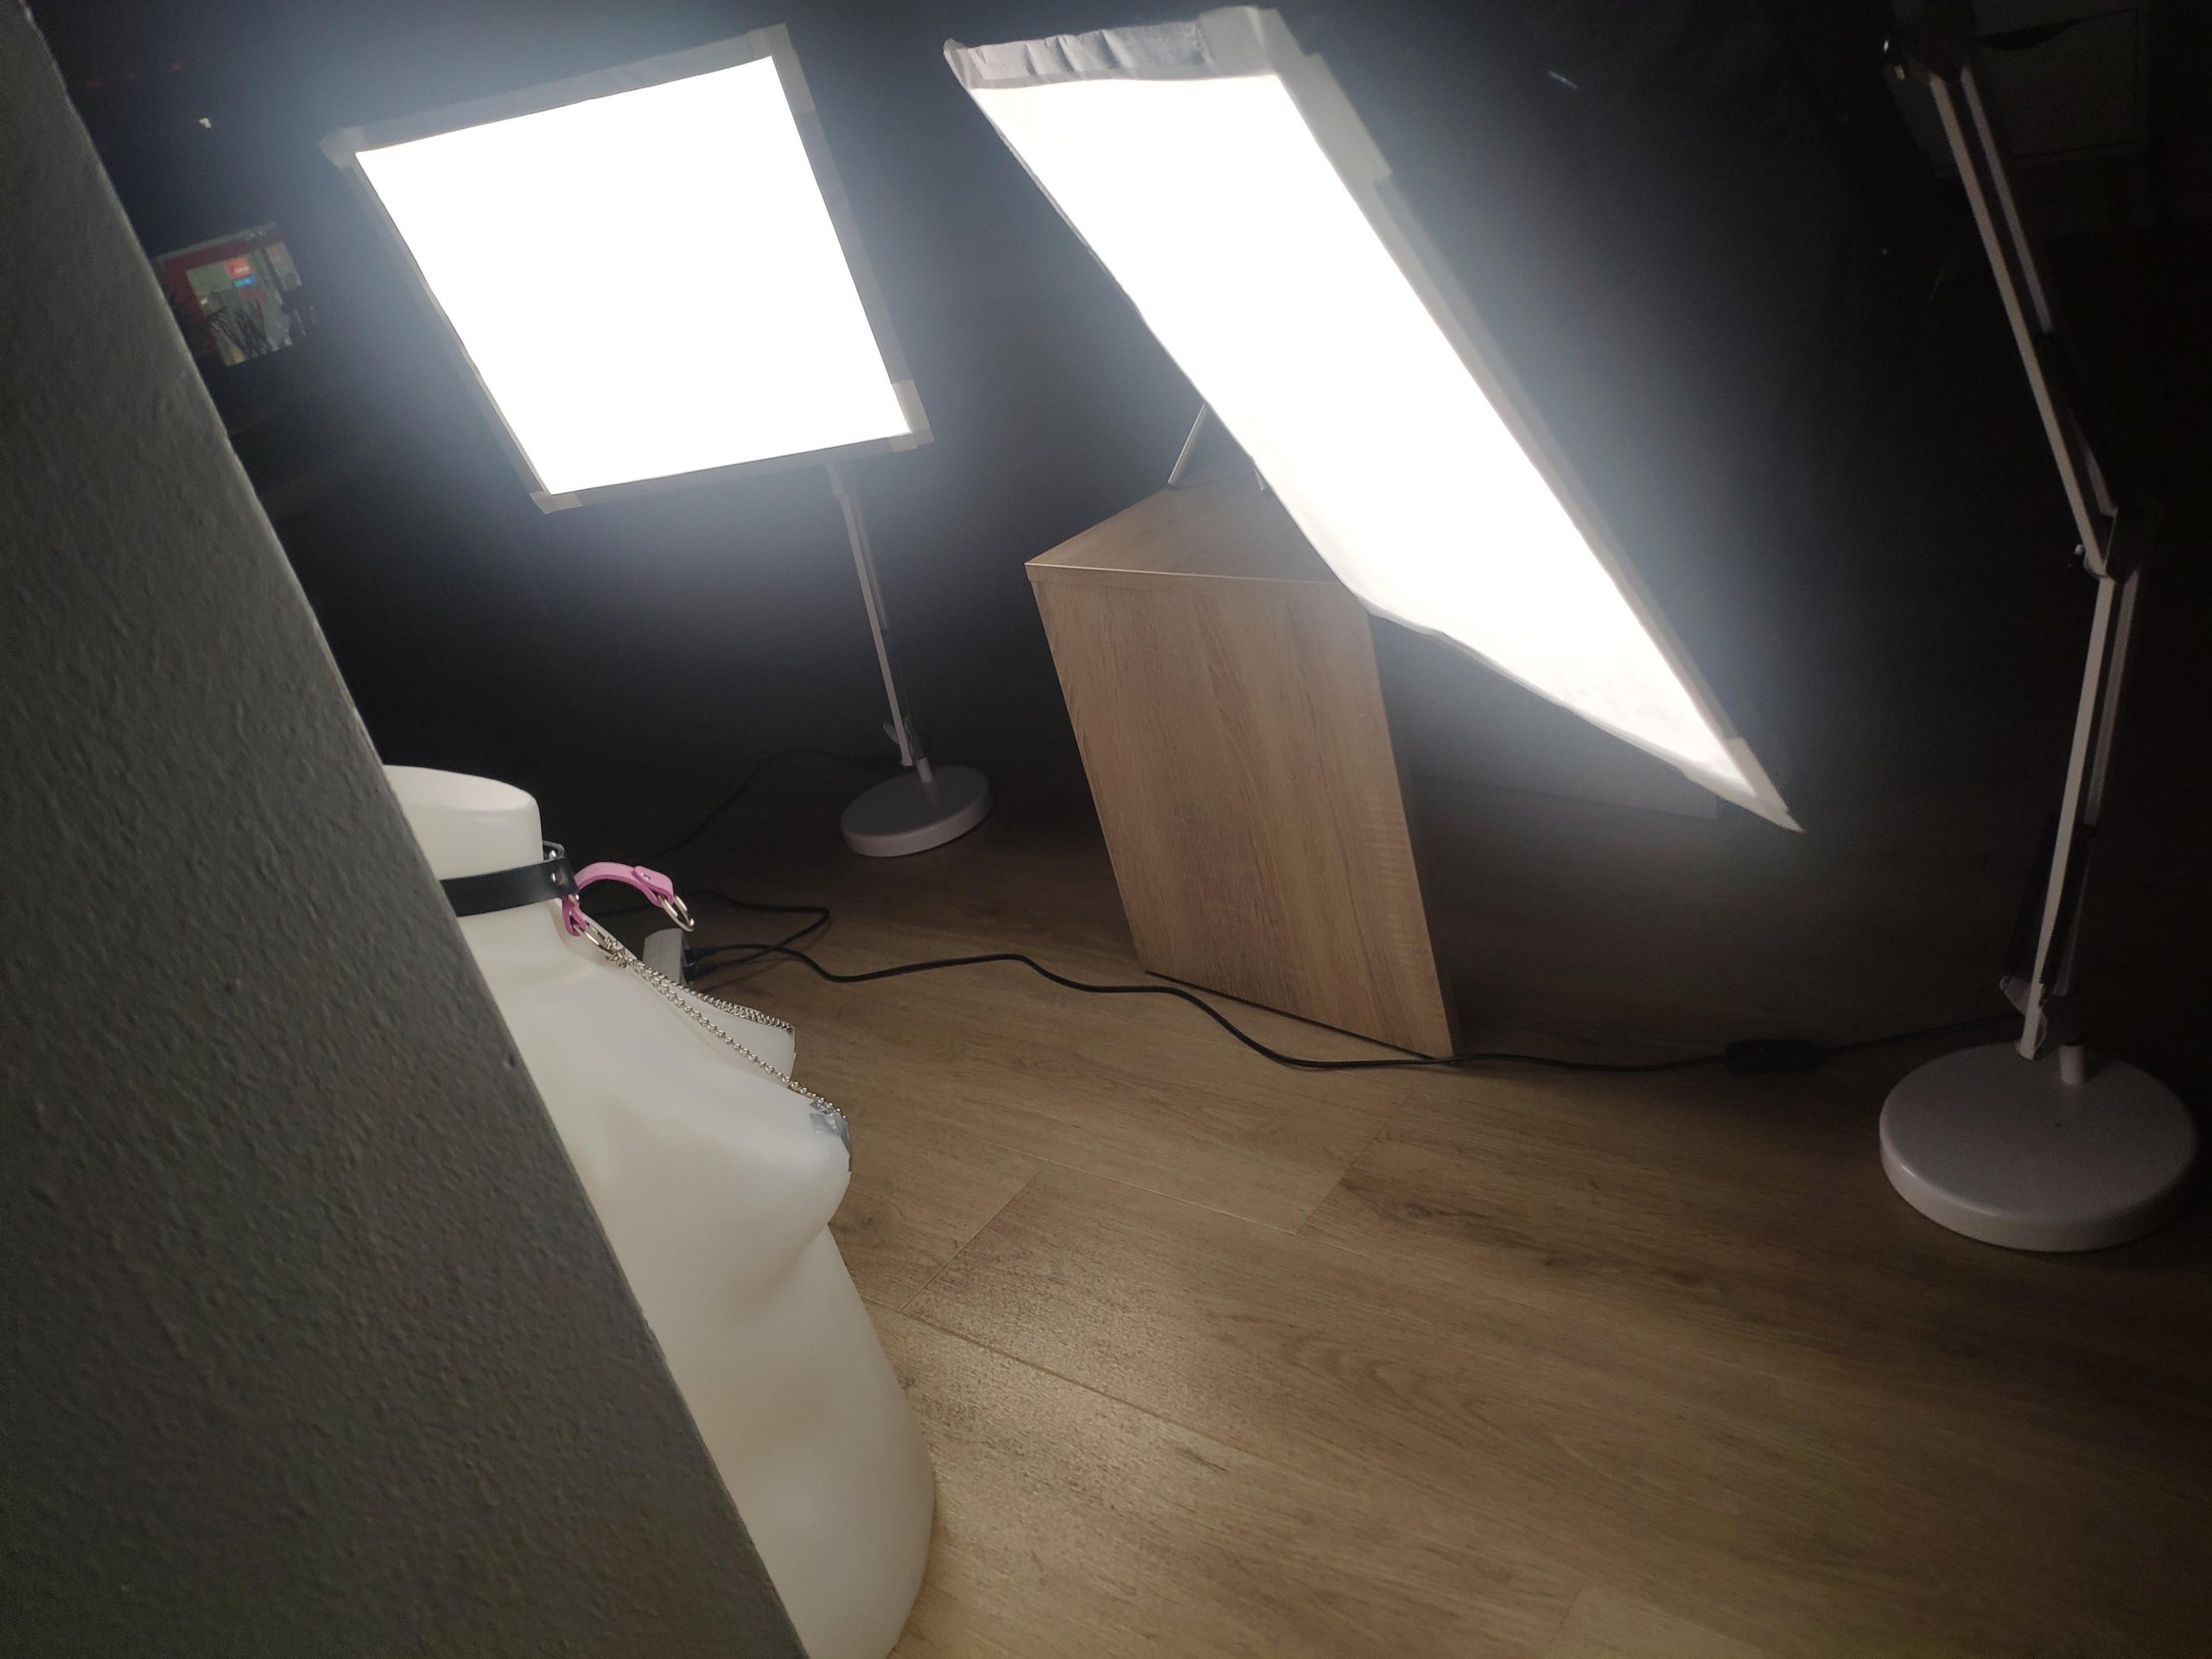 Diy softboxes for photography